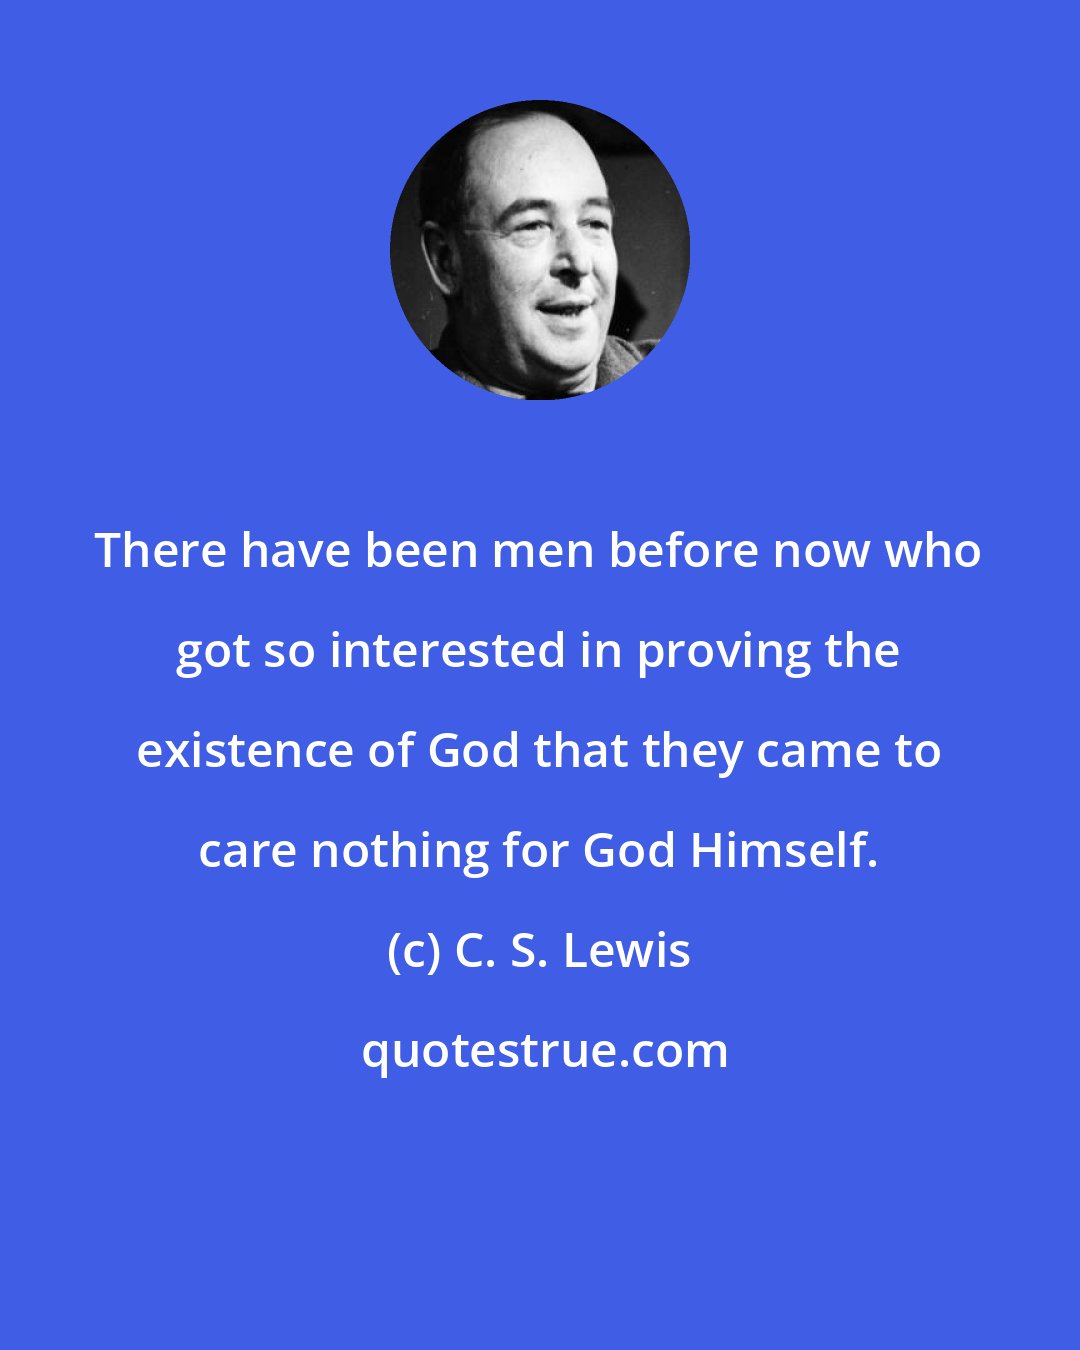 C. S. Lewis: There have been men before now who got so interested in proving the existence of God that they came to care nothing for God Himself.